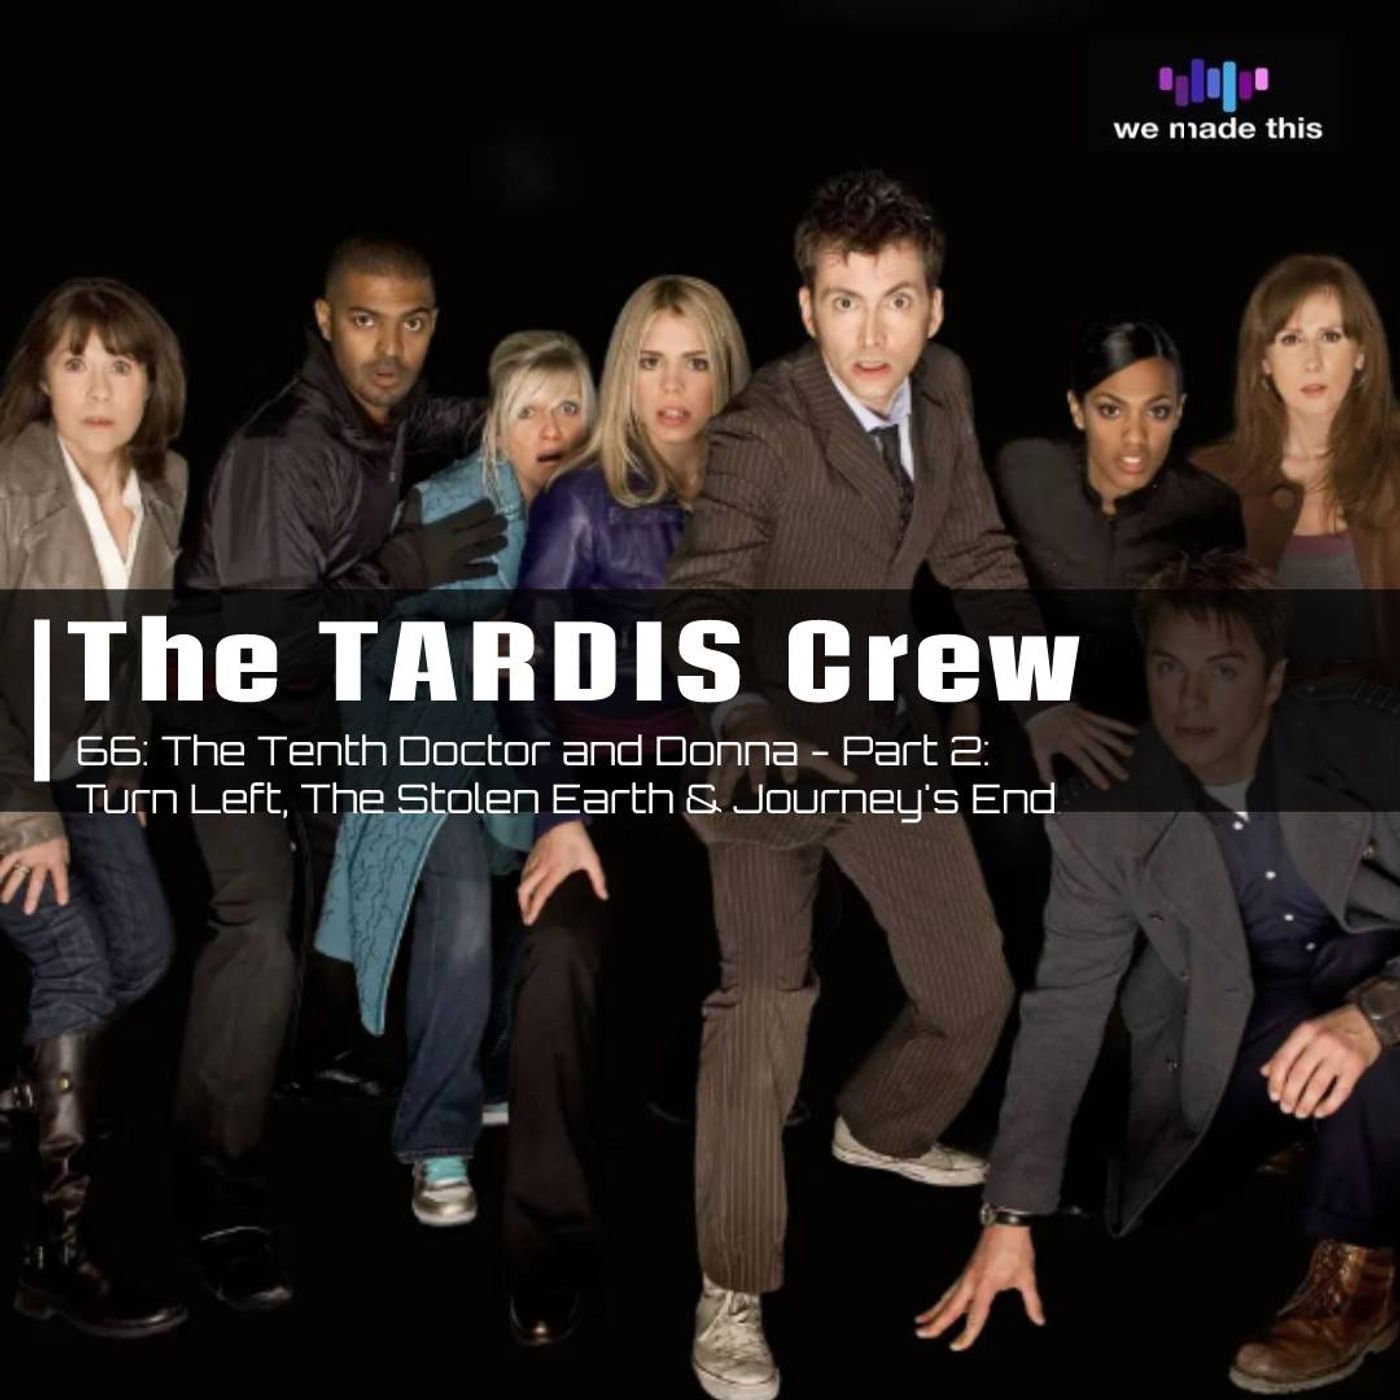 66. The Tenth Doctor and Donna Part 2: Turn Left, The Stolen Earth & Journey's End